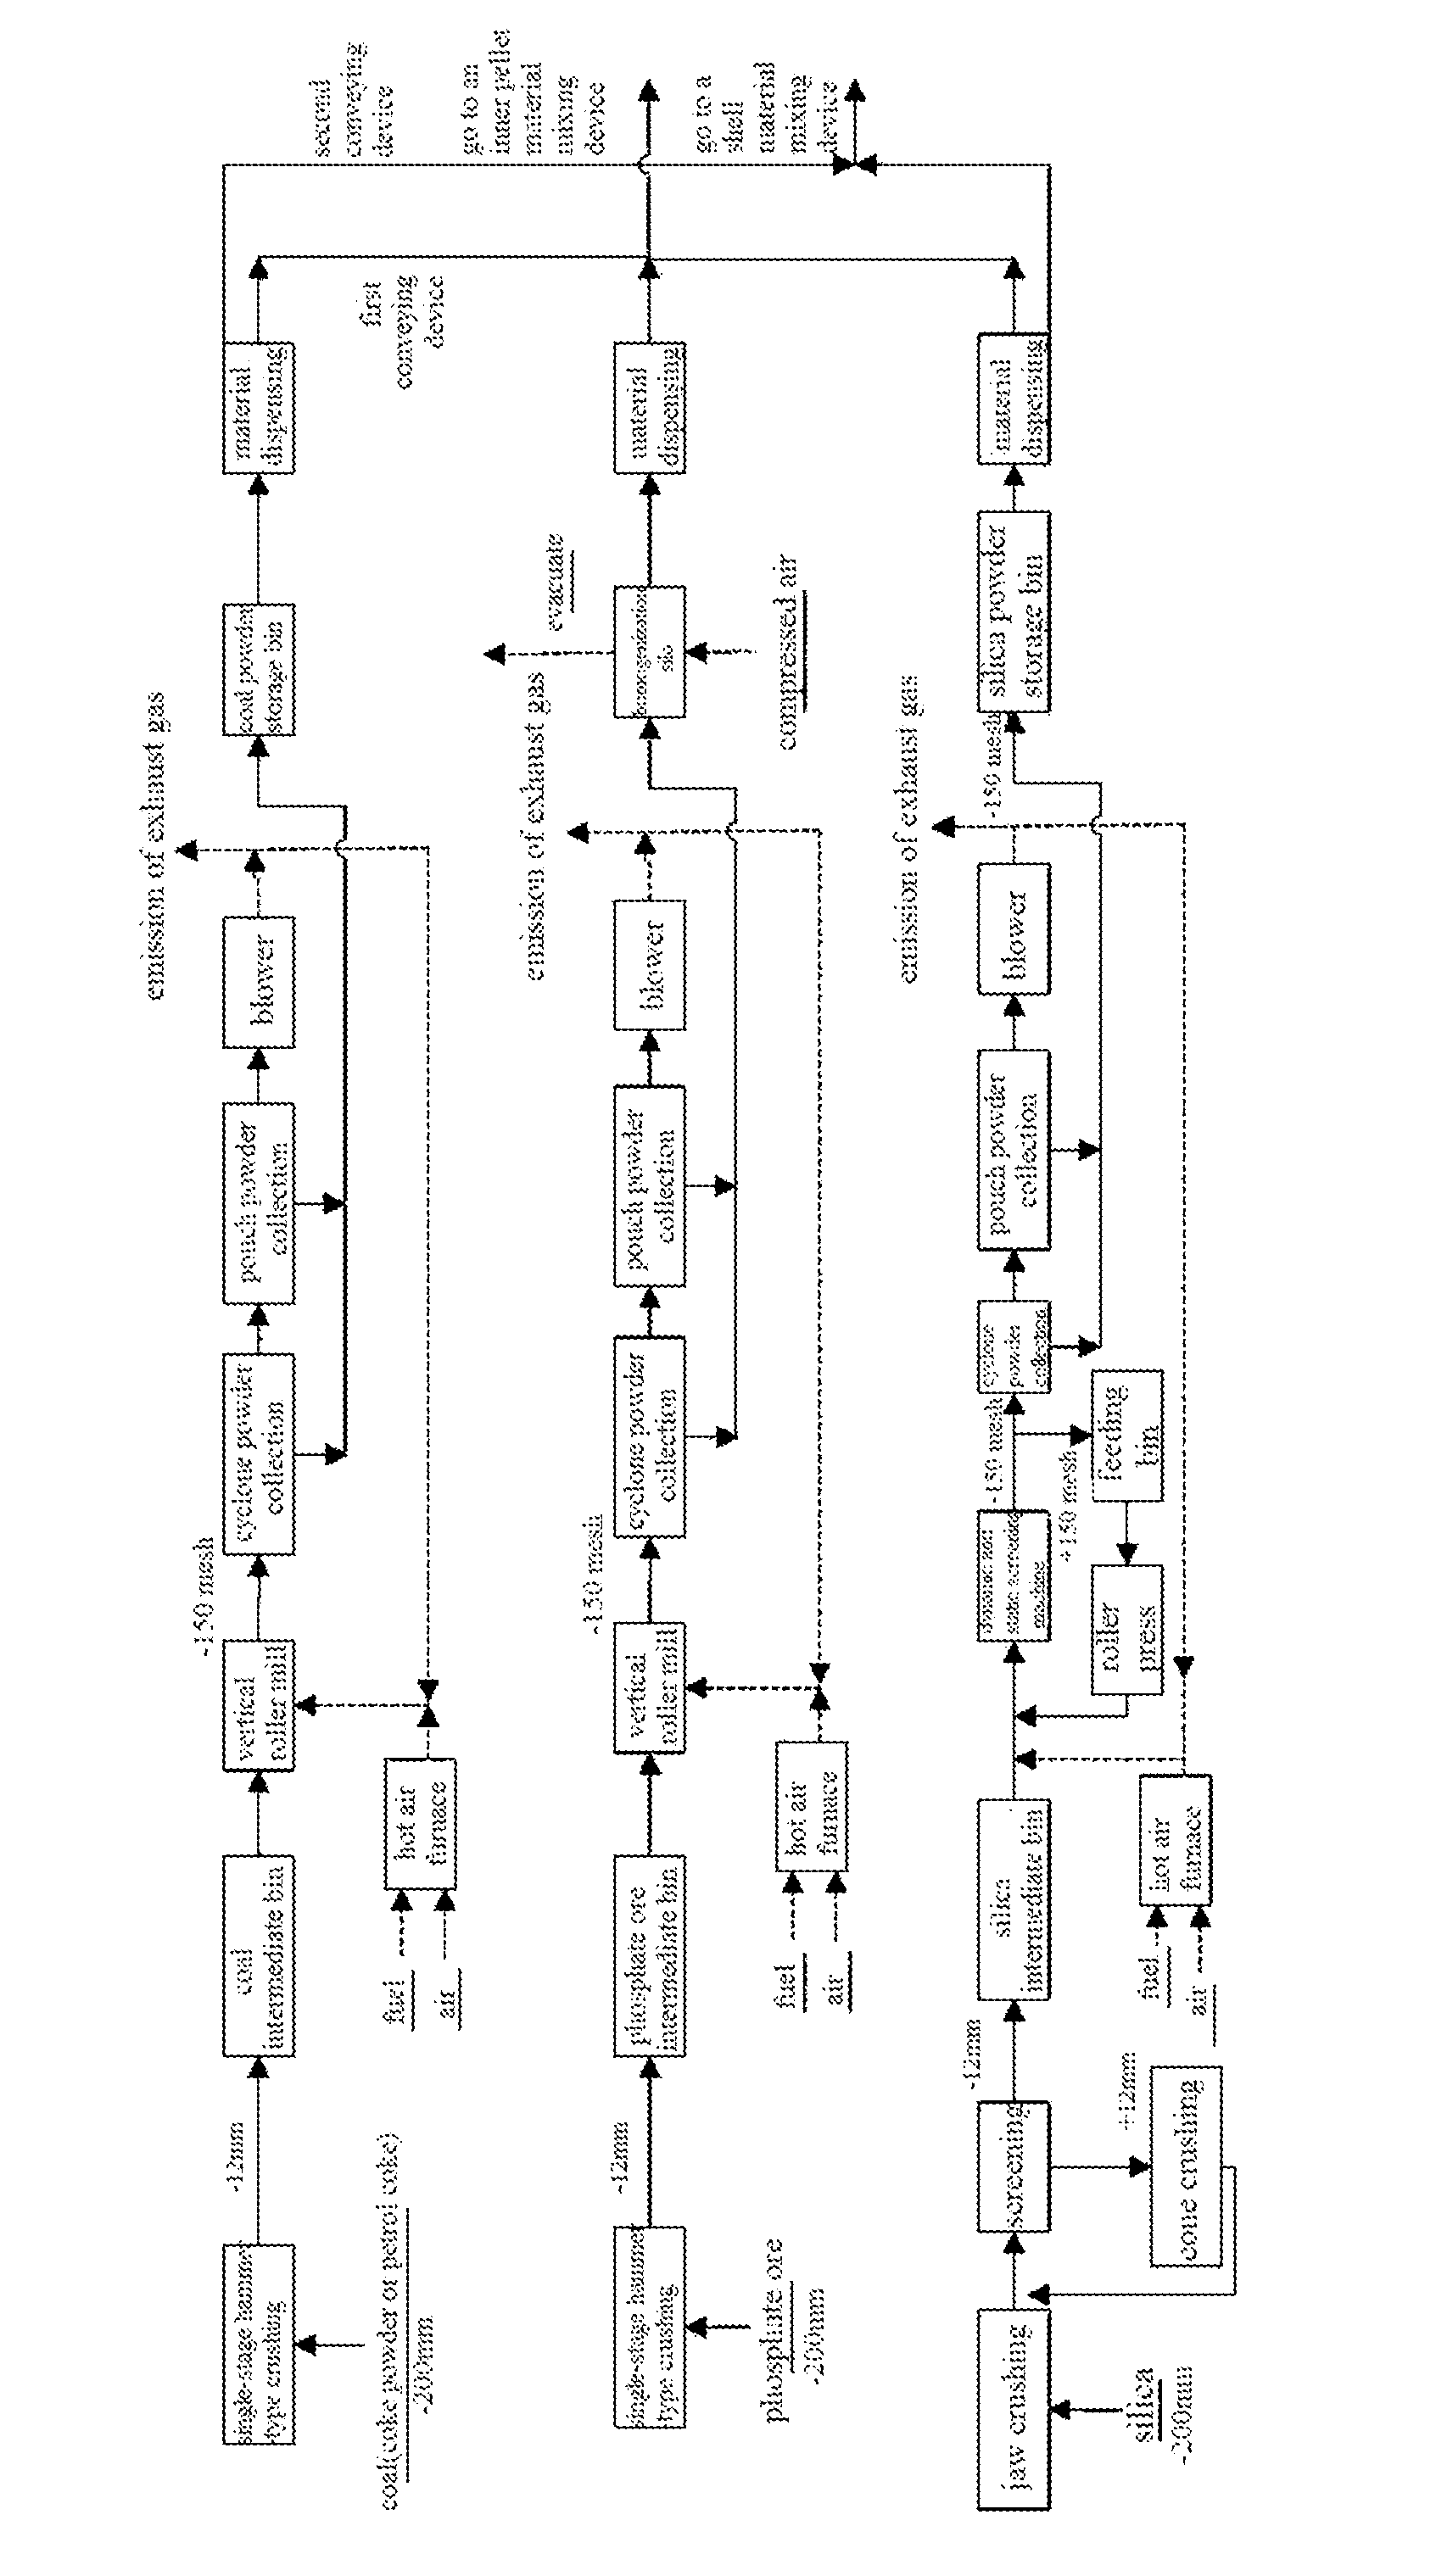 Raw material pre-treatment method and raw material pre-treatment process system suitable for kiln phosphoric acid process